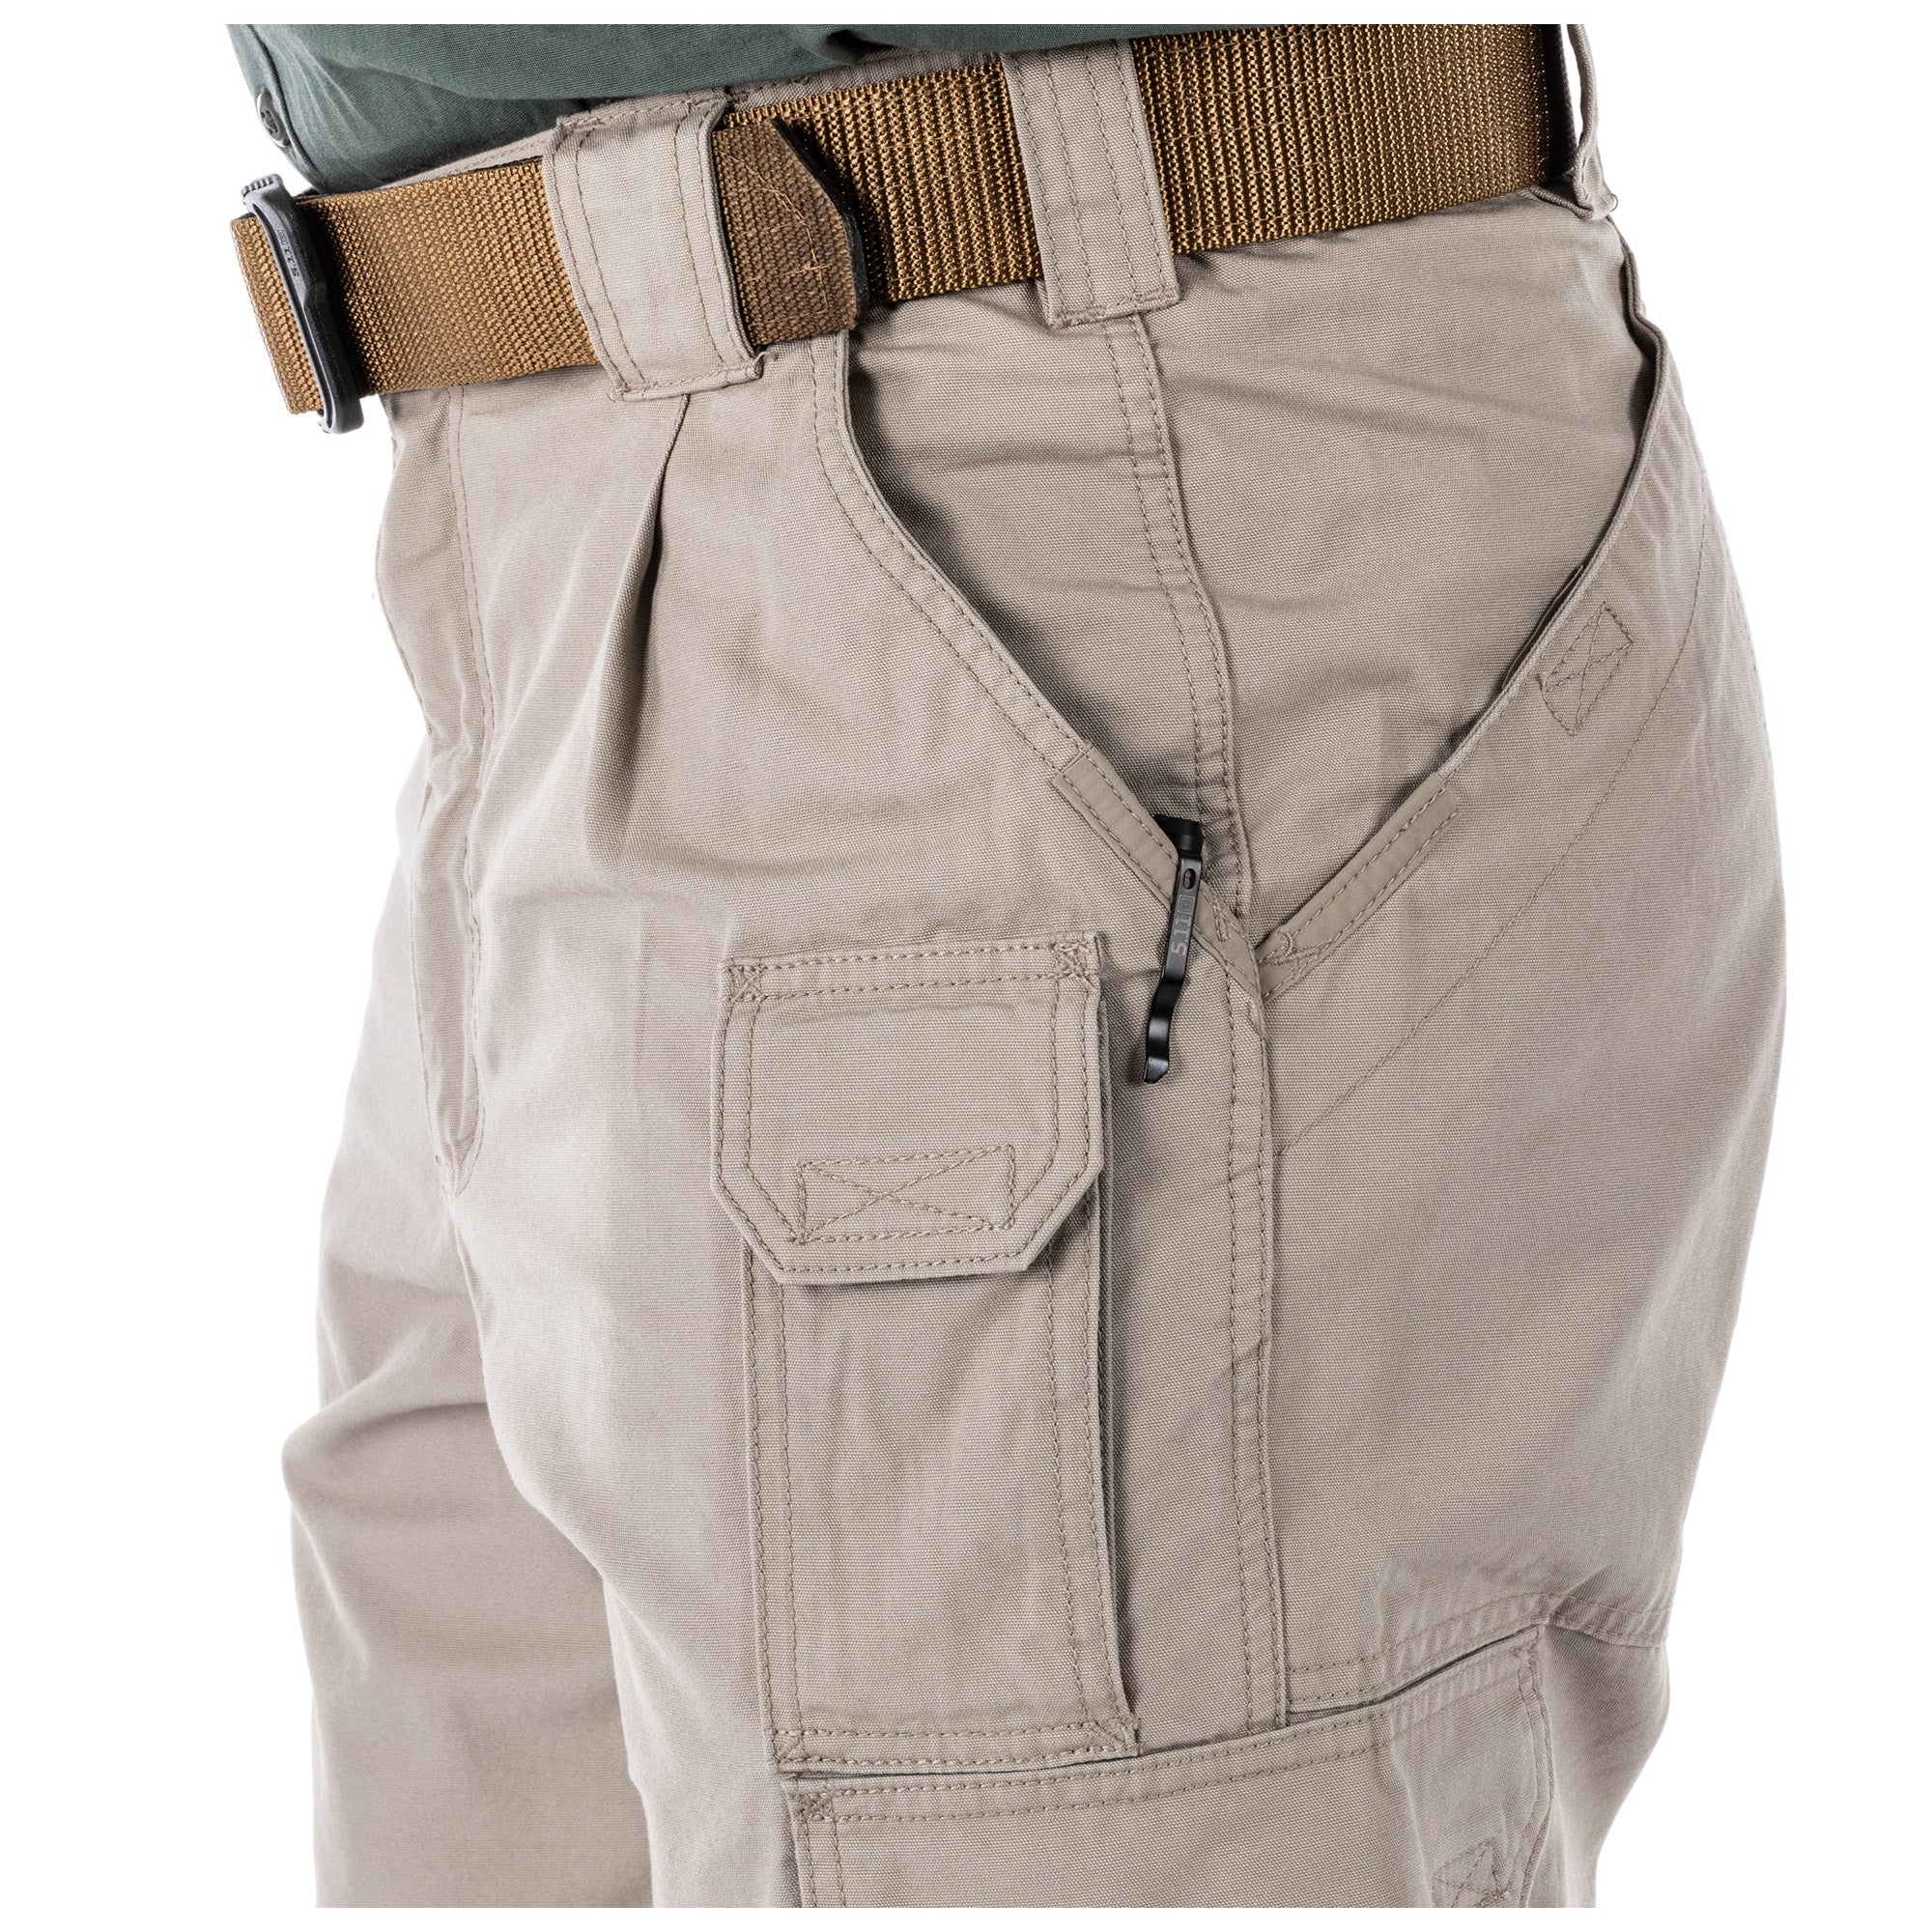 5.11 Tactical: Stryke Pant Now in Storm Grey. | Milled